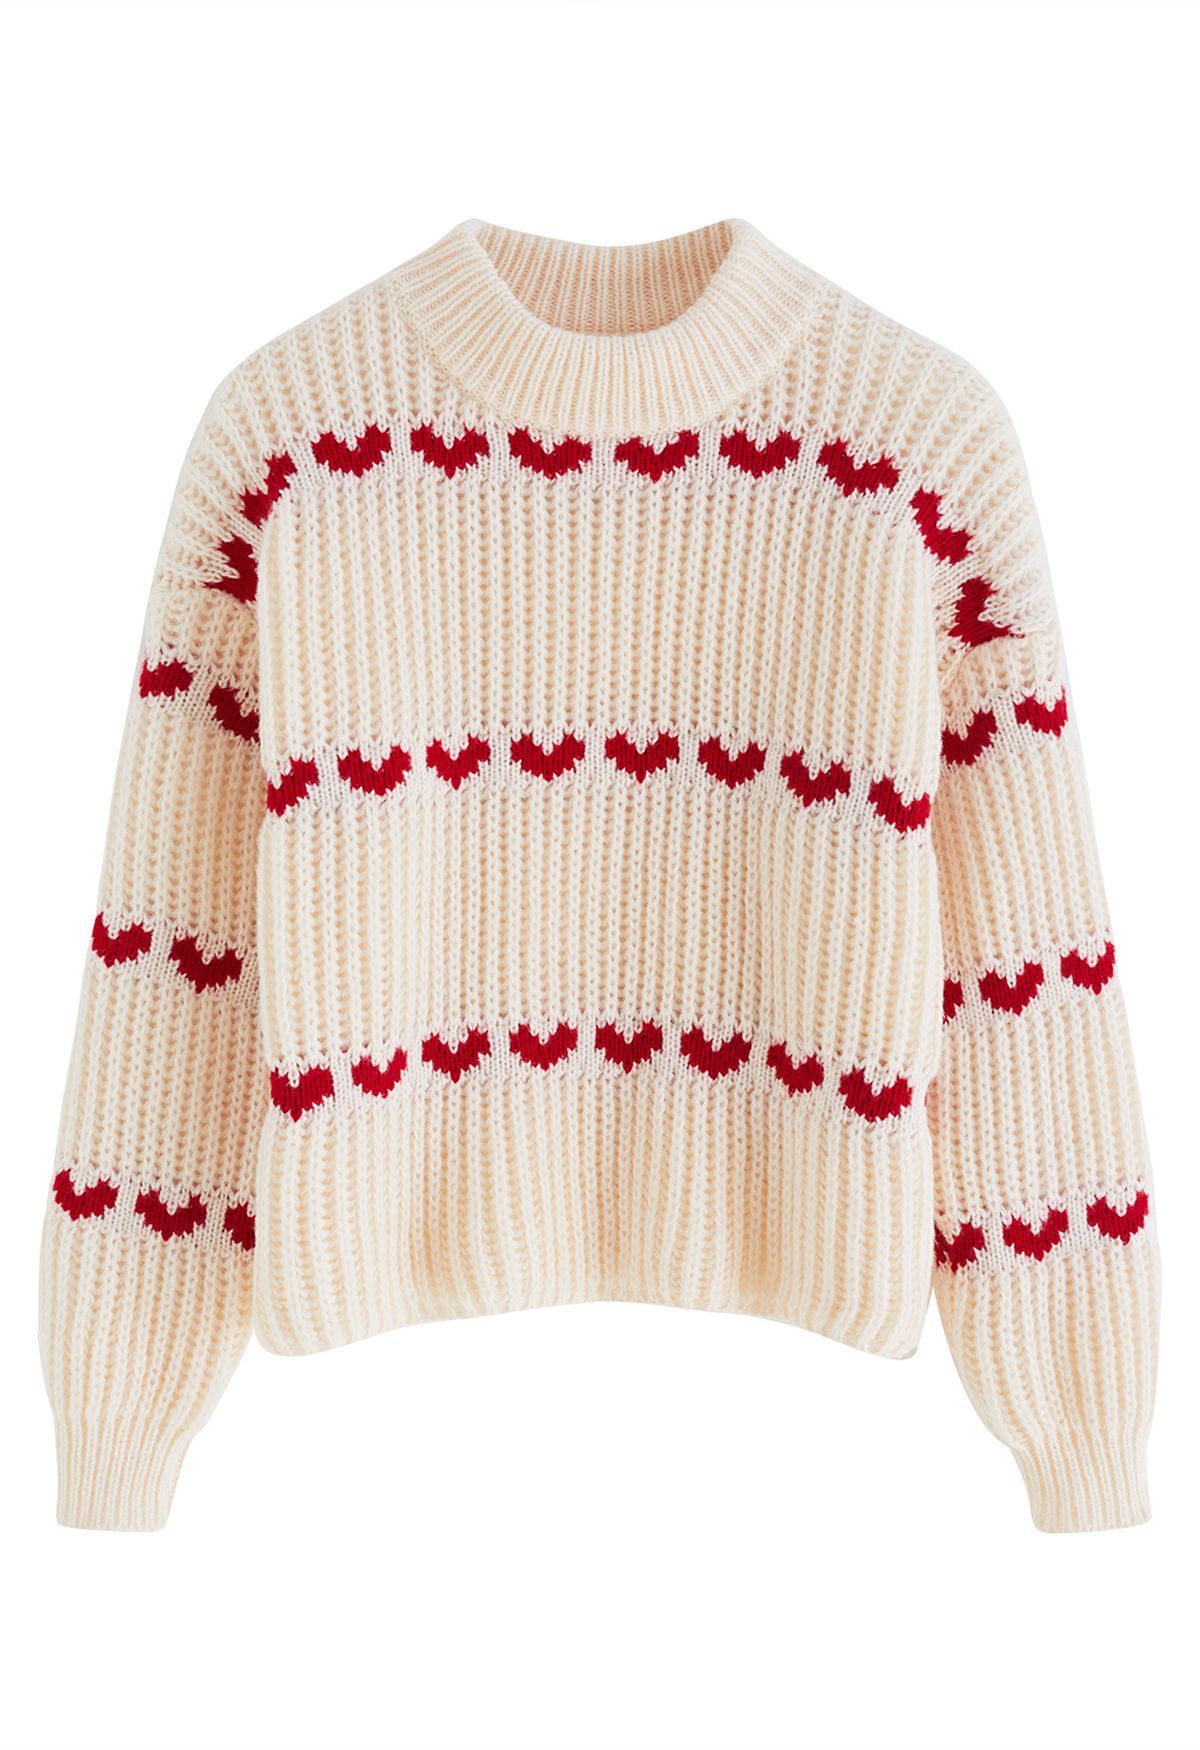 Rows of Heart Chunky Hand Knit Sweater | Chicwish